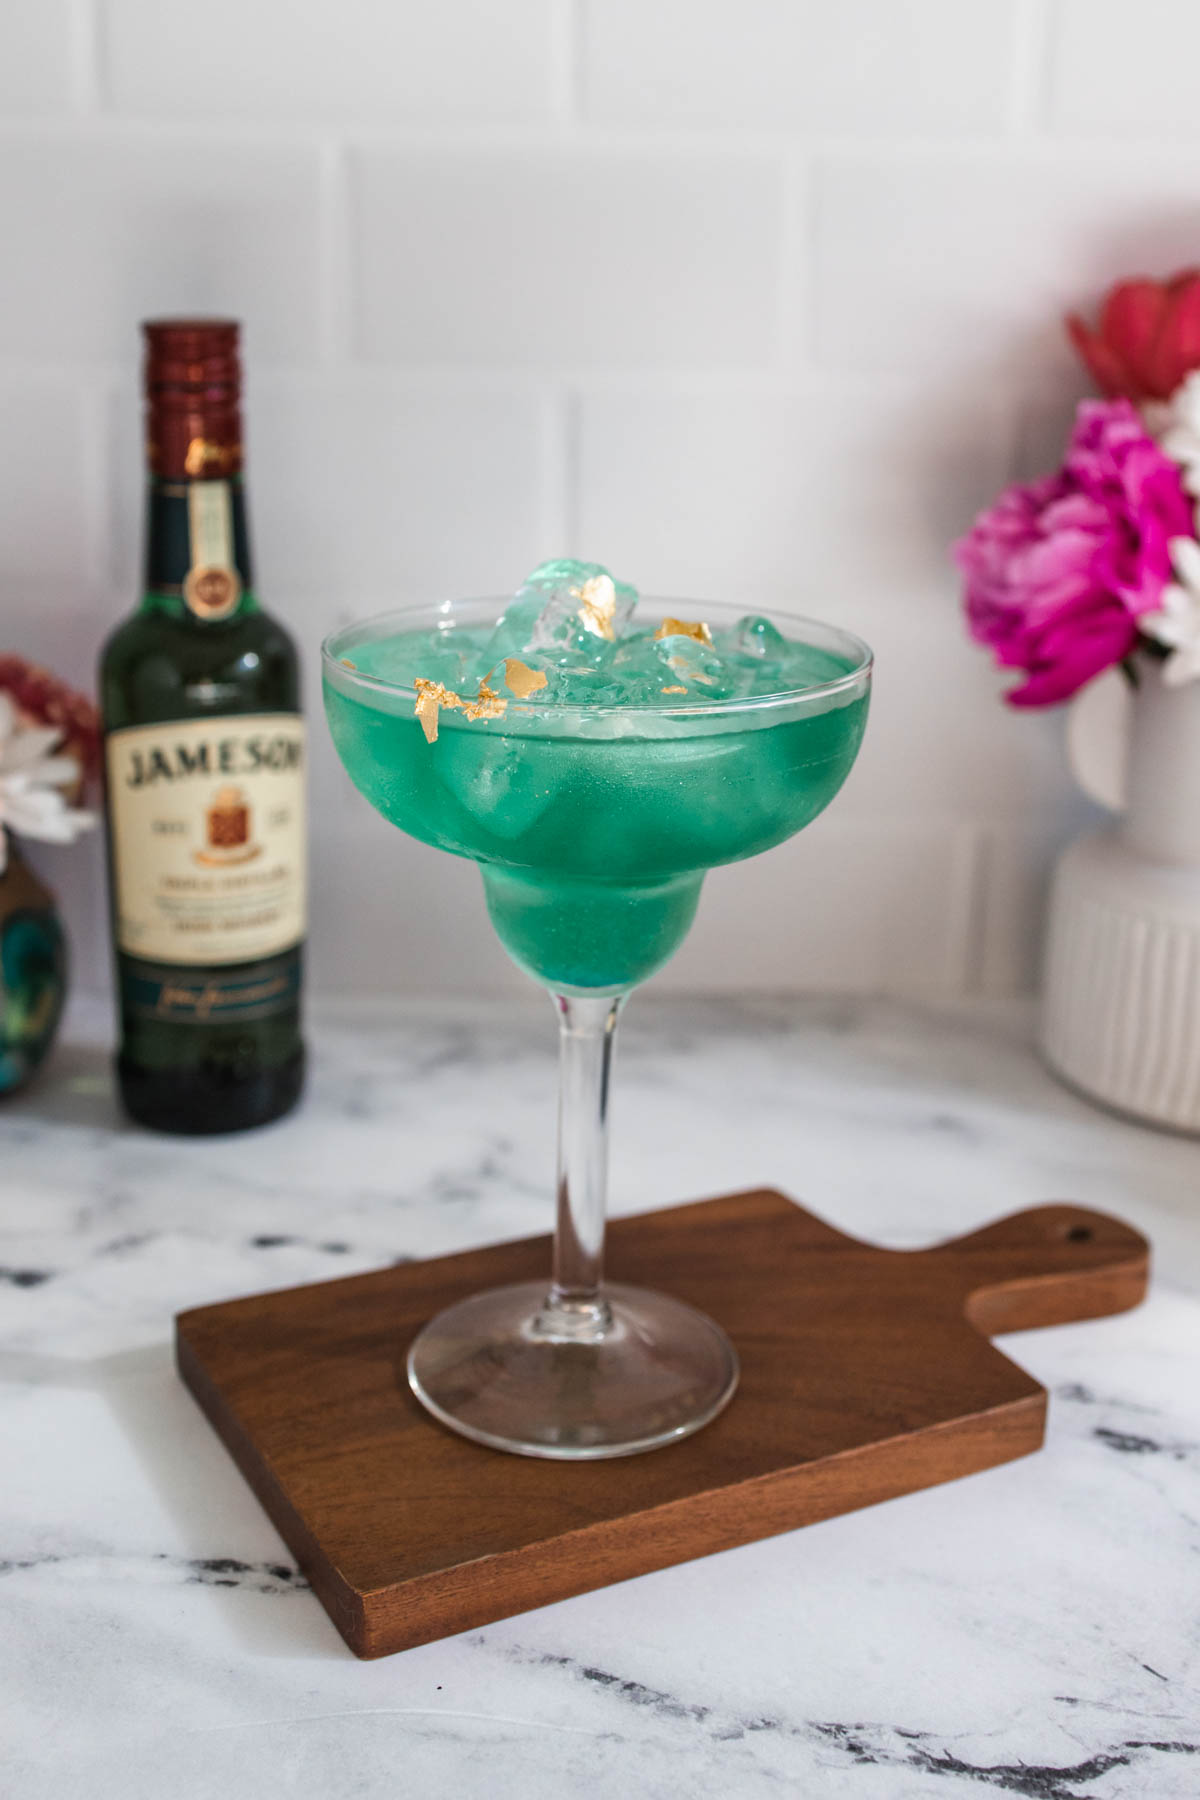 A green Irish Margarita for St. Patrick's Day on a wood tray with a bottle of Jameson Irish Whiskey behind it.